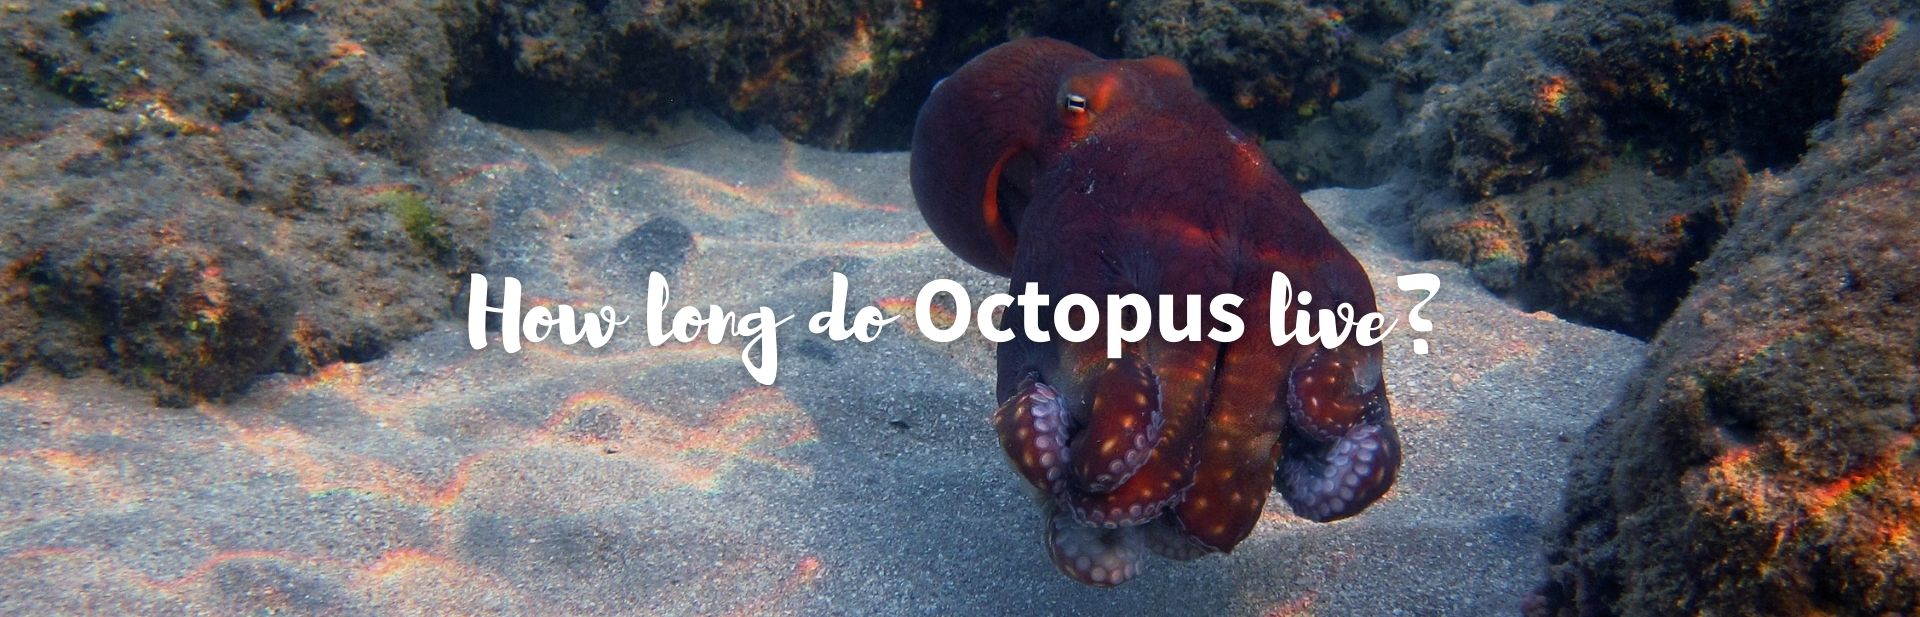 How Long Do Octopus Live? All About Their Unusual Life Cycle